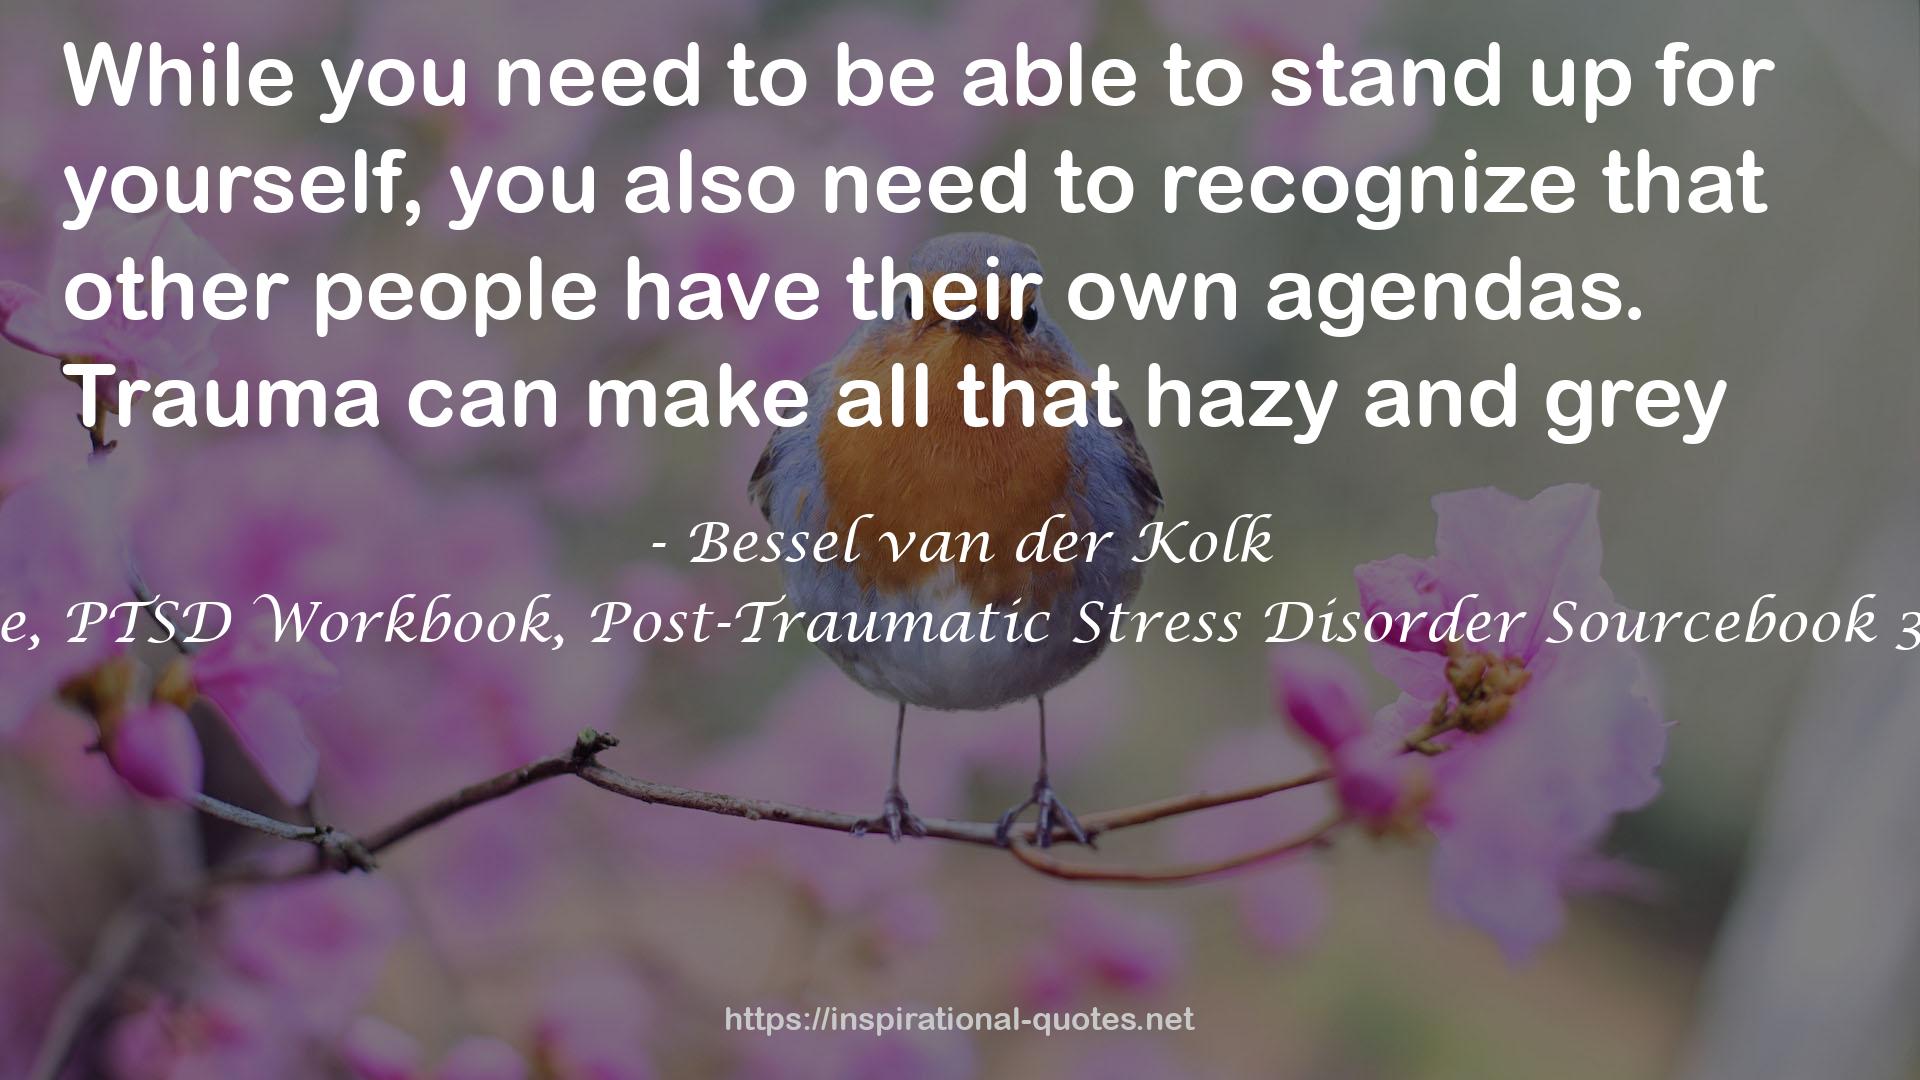 Body Keeps the Score, PTSD Workbook, Post-Traumatic Stress Disorder Sourcebook 3 Books Collection Set QUOTES